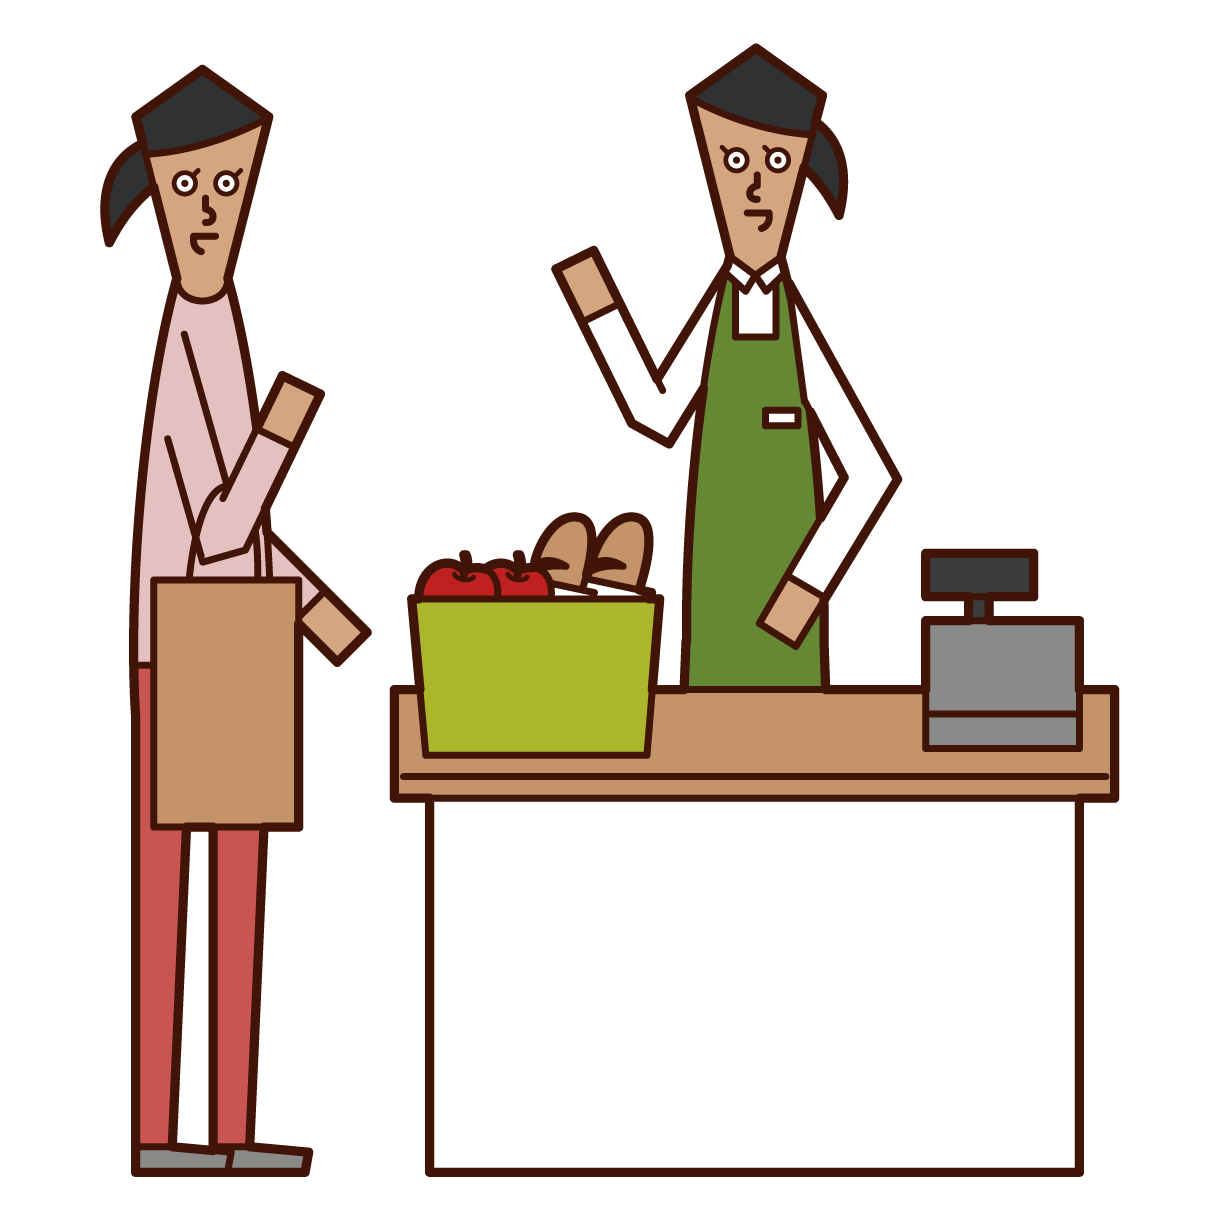 Illustration of a clerk (woman) accounting at a cash register